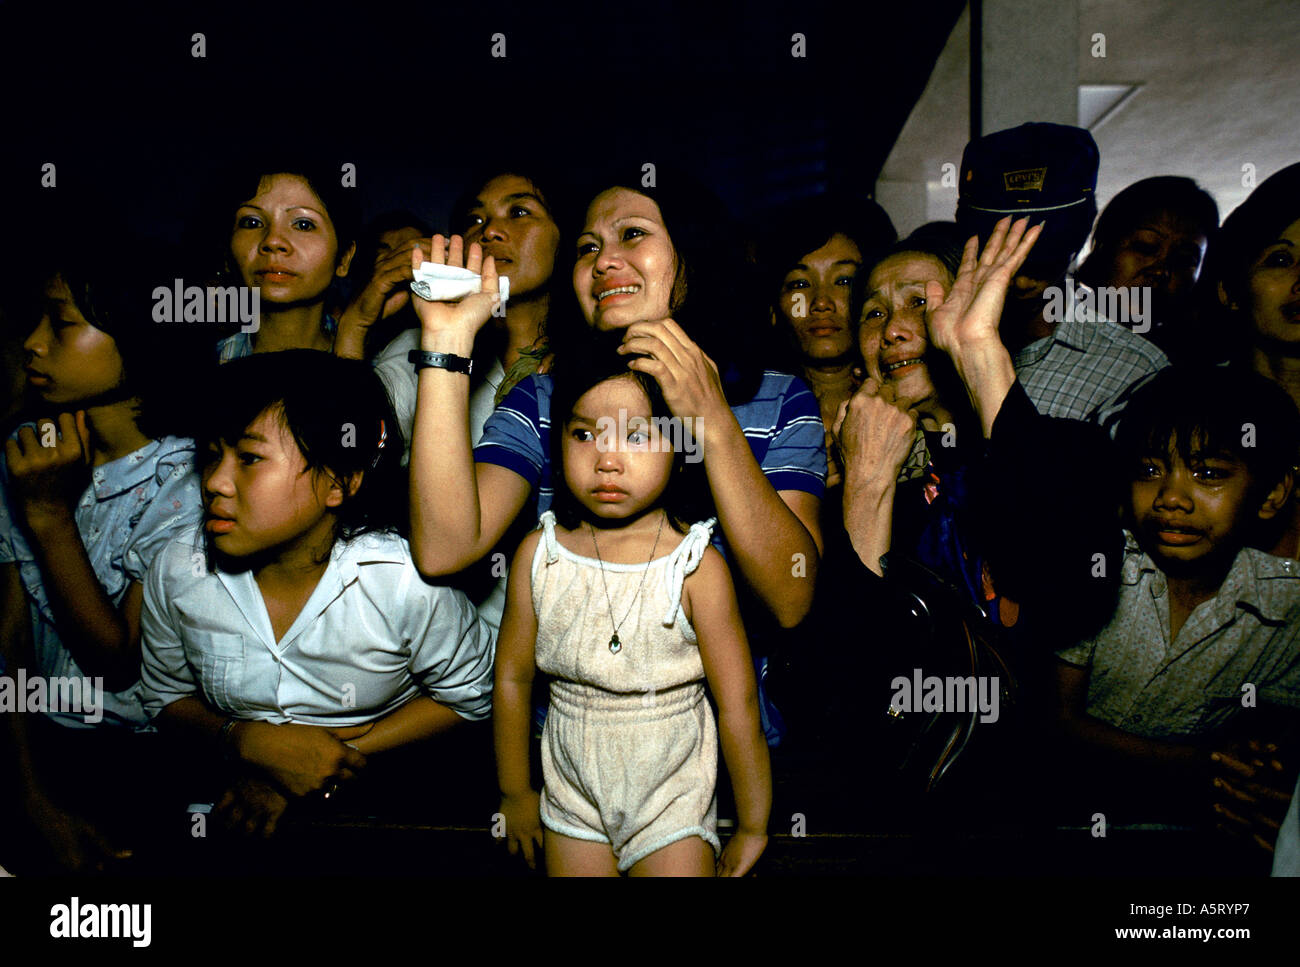 VIETNAM,  A WOMAN AND OLD LADY WAVING GOODBYE WHILE THE OTHERS LOOK ON WITH SADNESSAS FAMILIES GET SPLIT UP, SAIGON INT. AIRPO Stock Photo